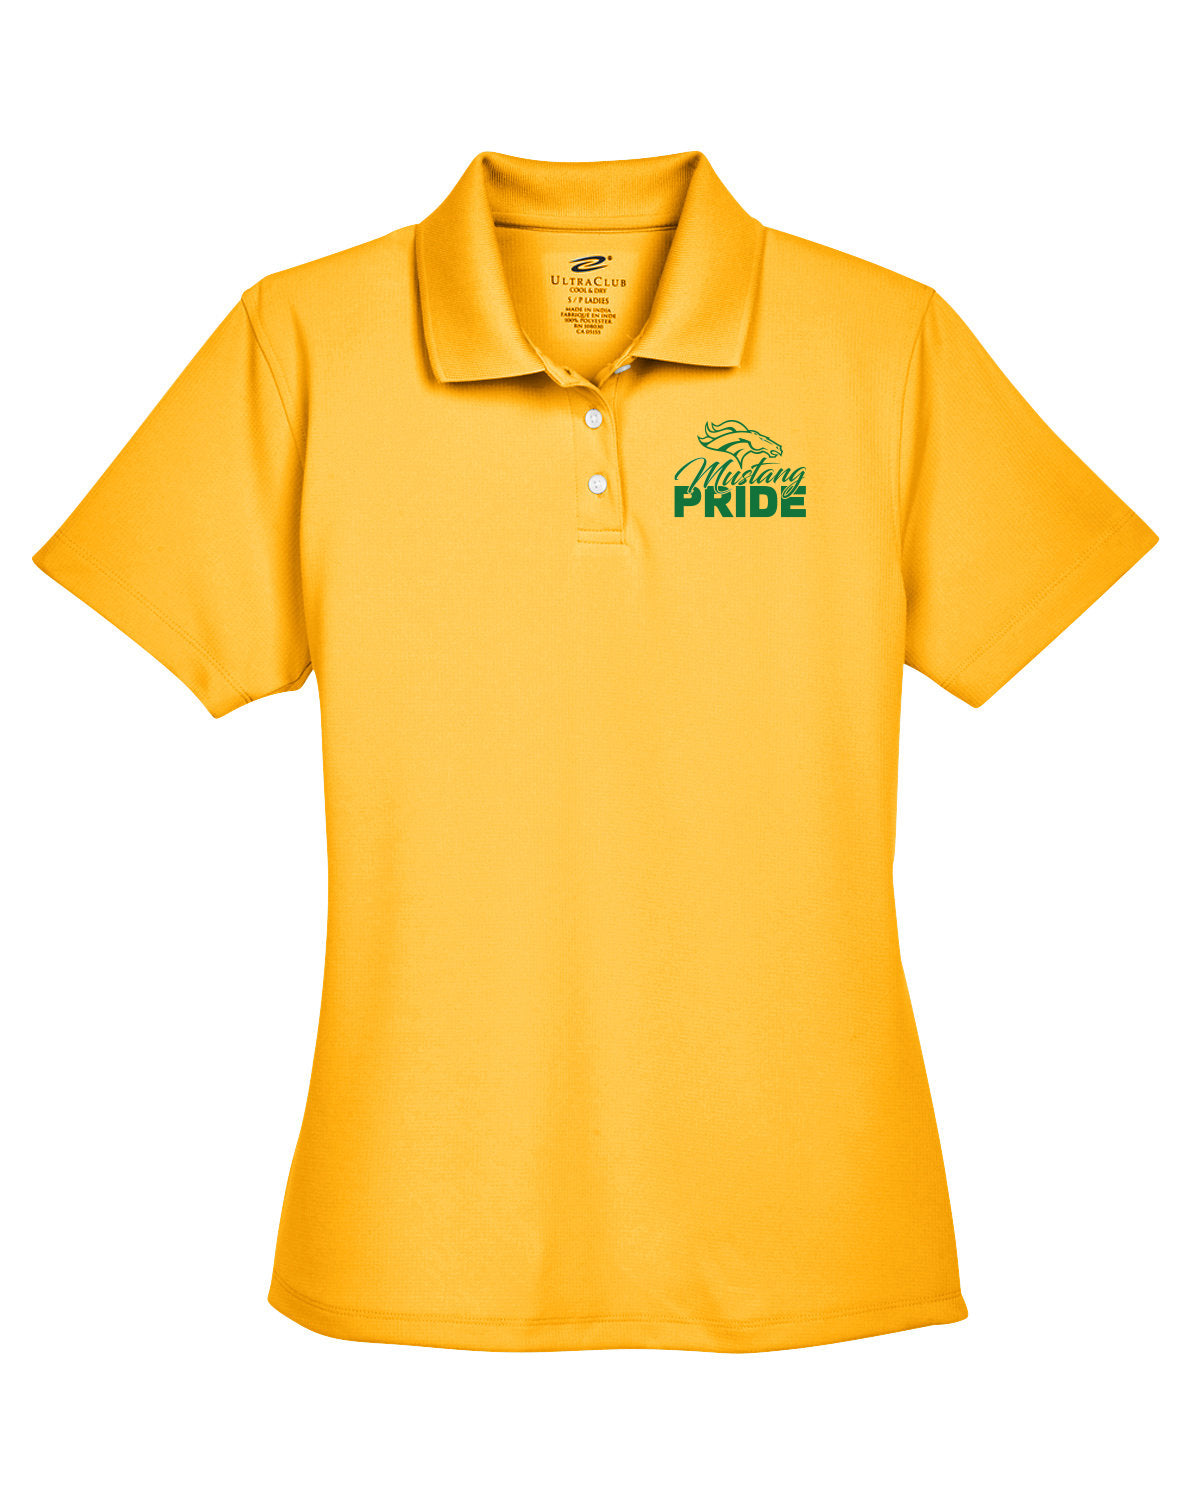 8445L- HEMPSTEAD STAFF UltraClub Ladies' Cool & Dry Stain-Release Performance Polo